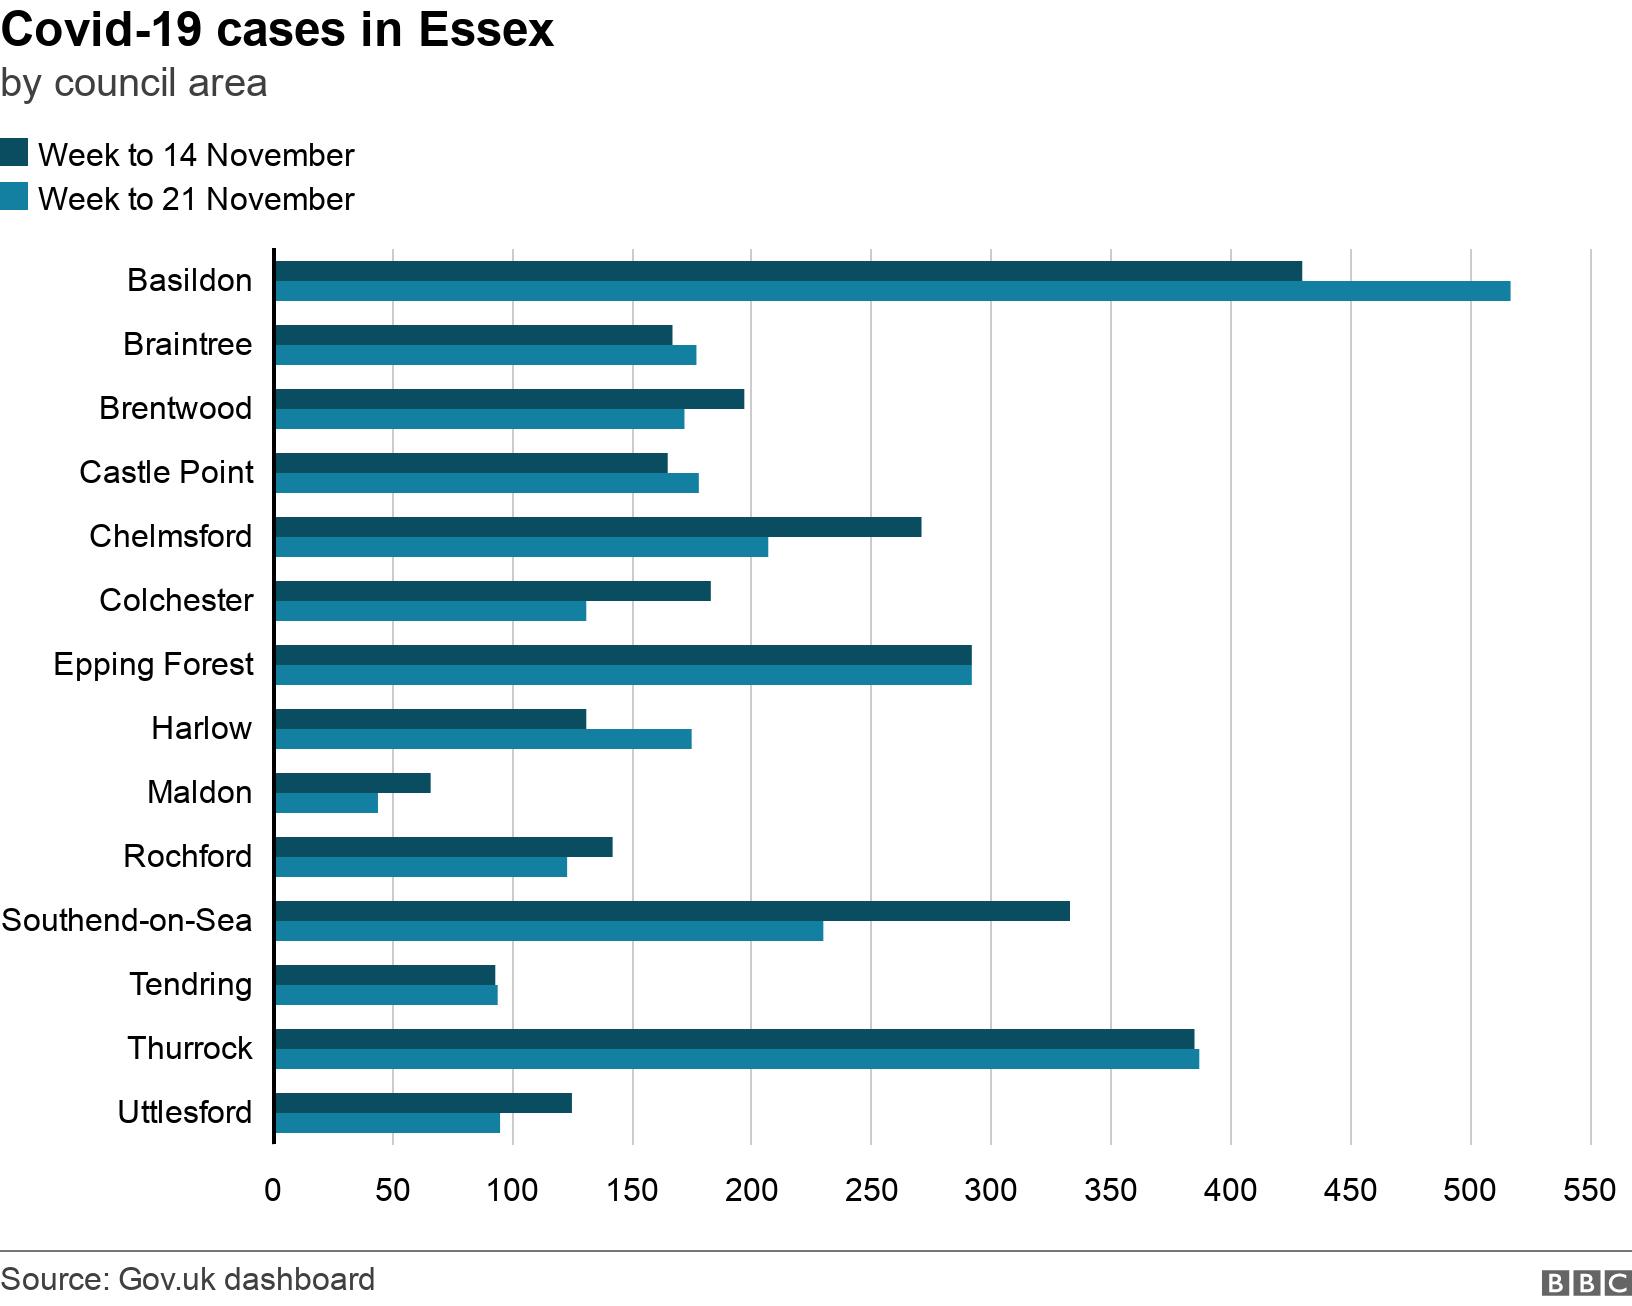 Covid-19 cases in Essex. by council area. Cases of Covid-19 in Essex by council area in week to 21 November .